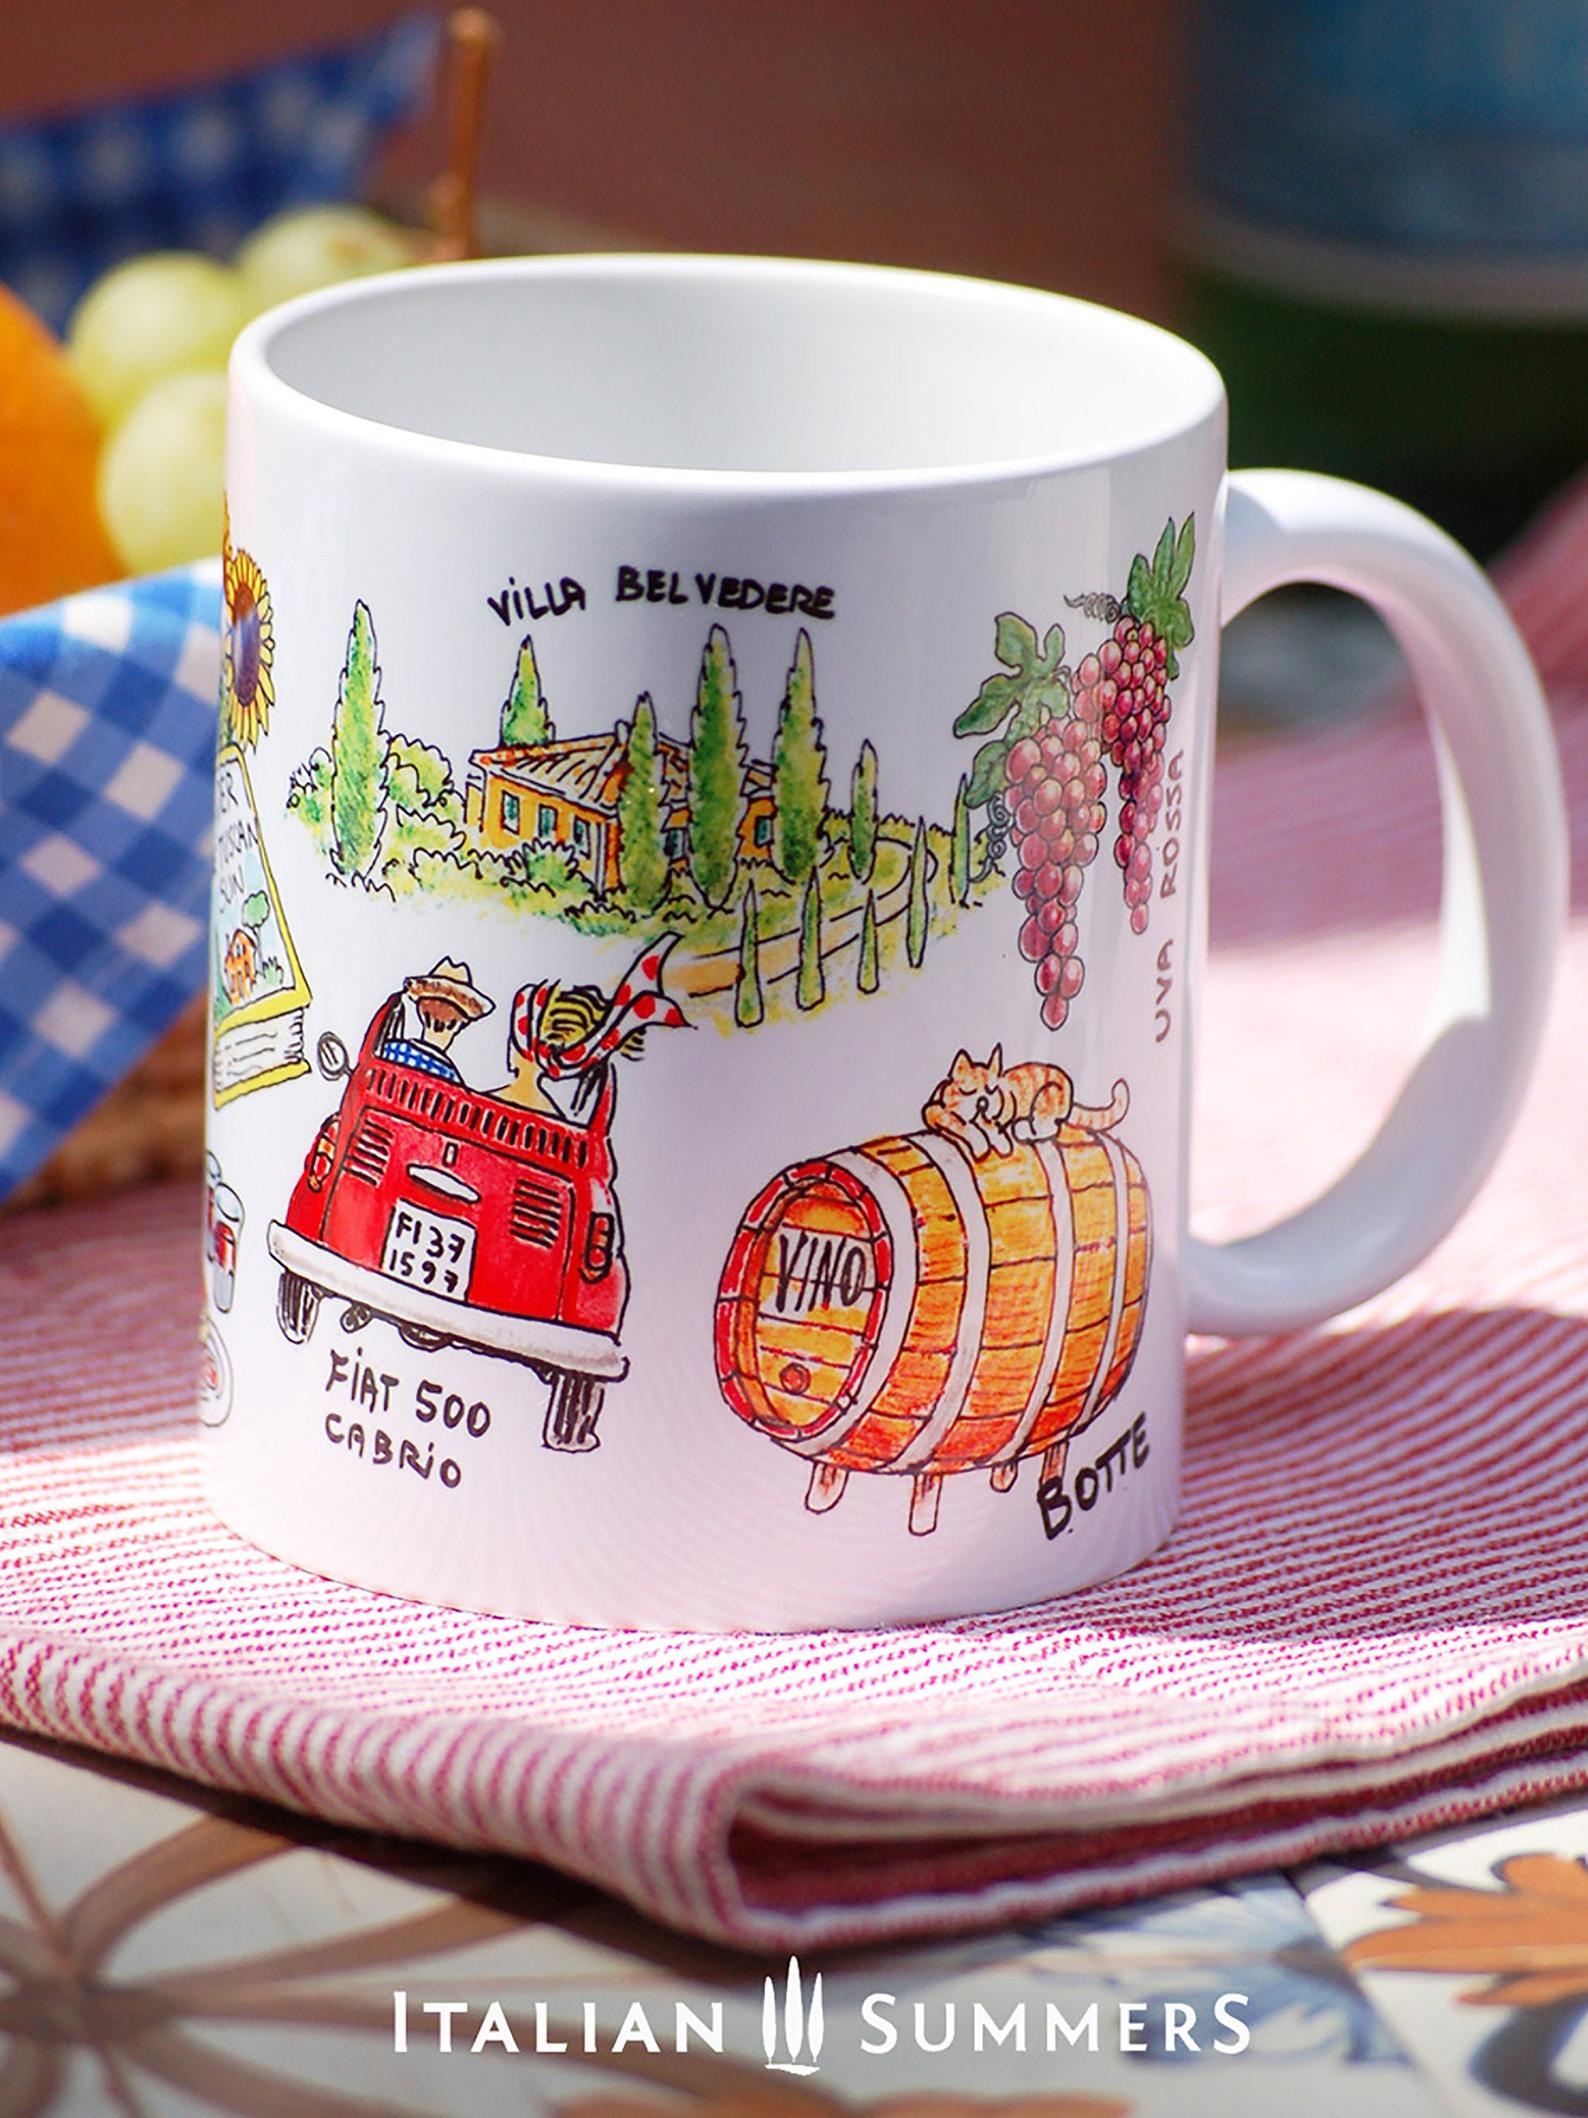 Italy | Tuscany inspired coffee mug with sketches of Tuscany how you would like it to be! A sketch of Villa Belvedere with cipresses, a red vintage Fiat 500 cabrio, hanging grape bunches, a wooden wine barrel, the book Under the Tuscan sun with sunflowers next to it. A big flask of Chianti classico and bruschette and the little chapel Vitaleta. By the way, of course on the wine barel there is a cat sleeping! 